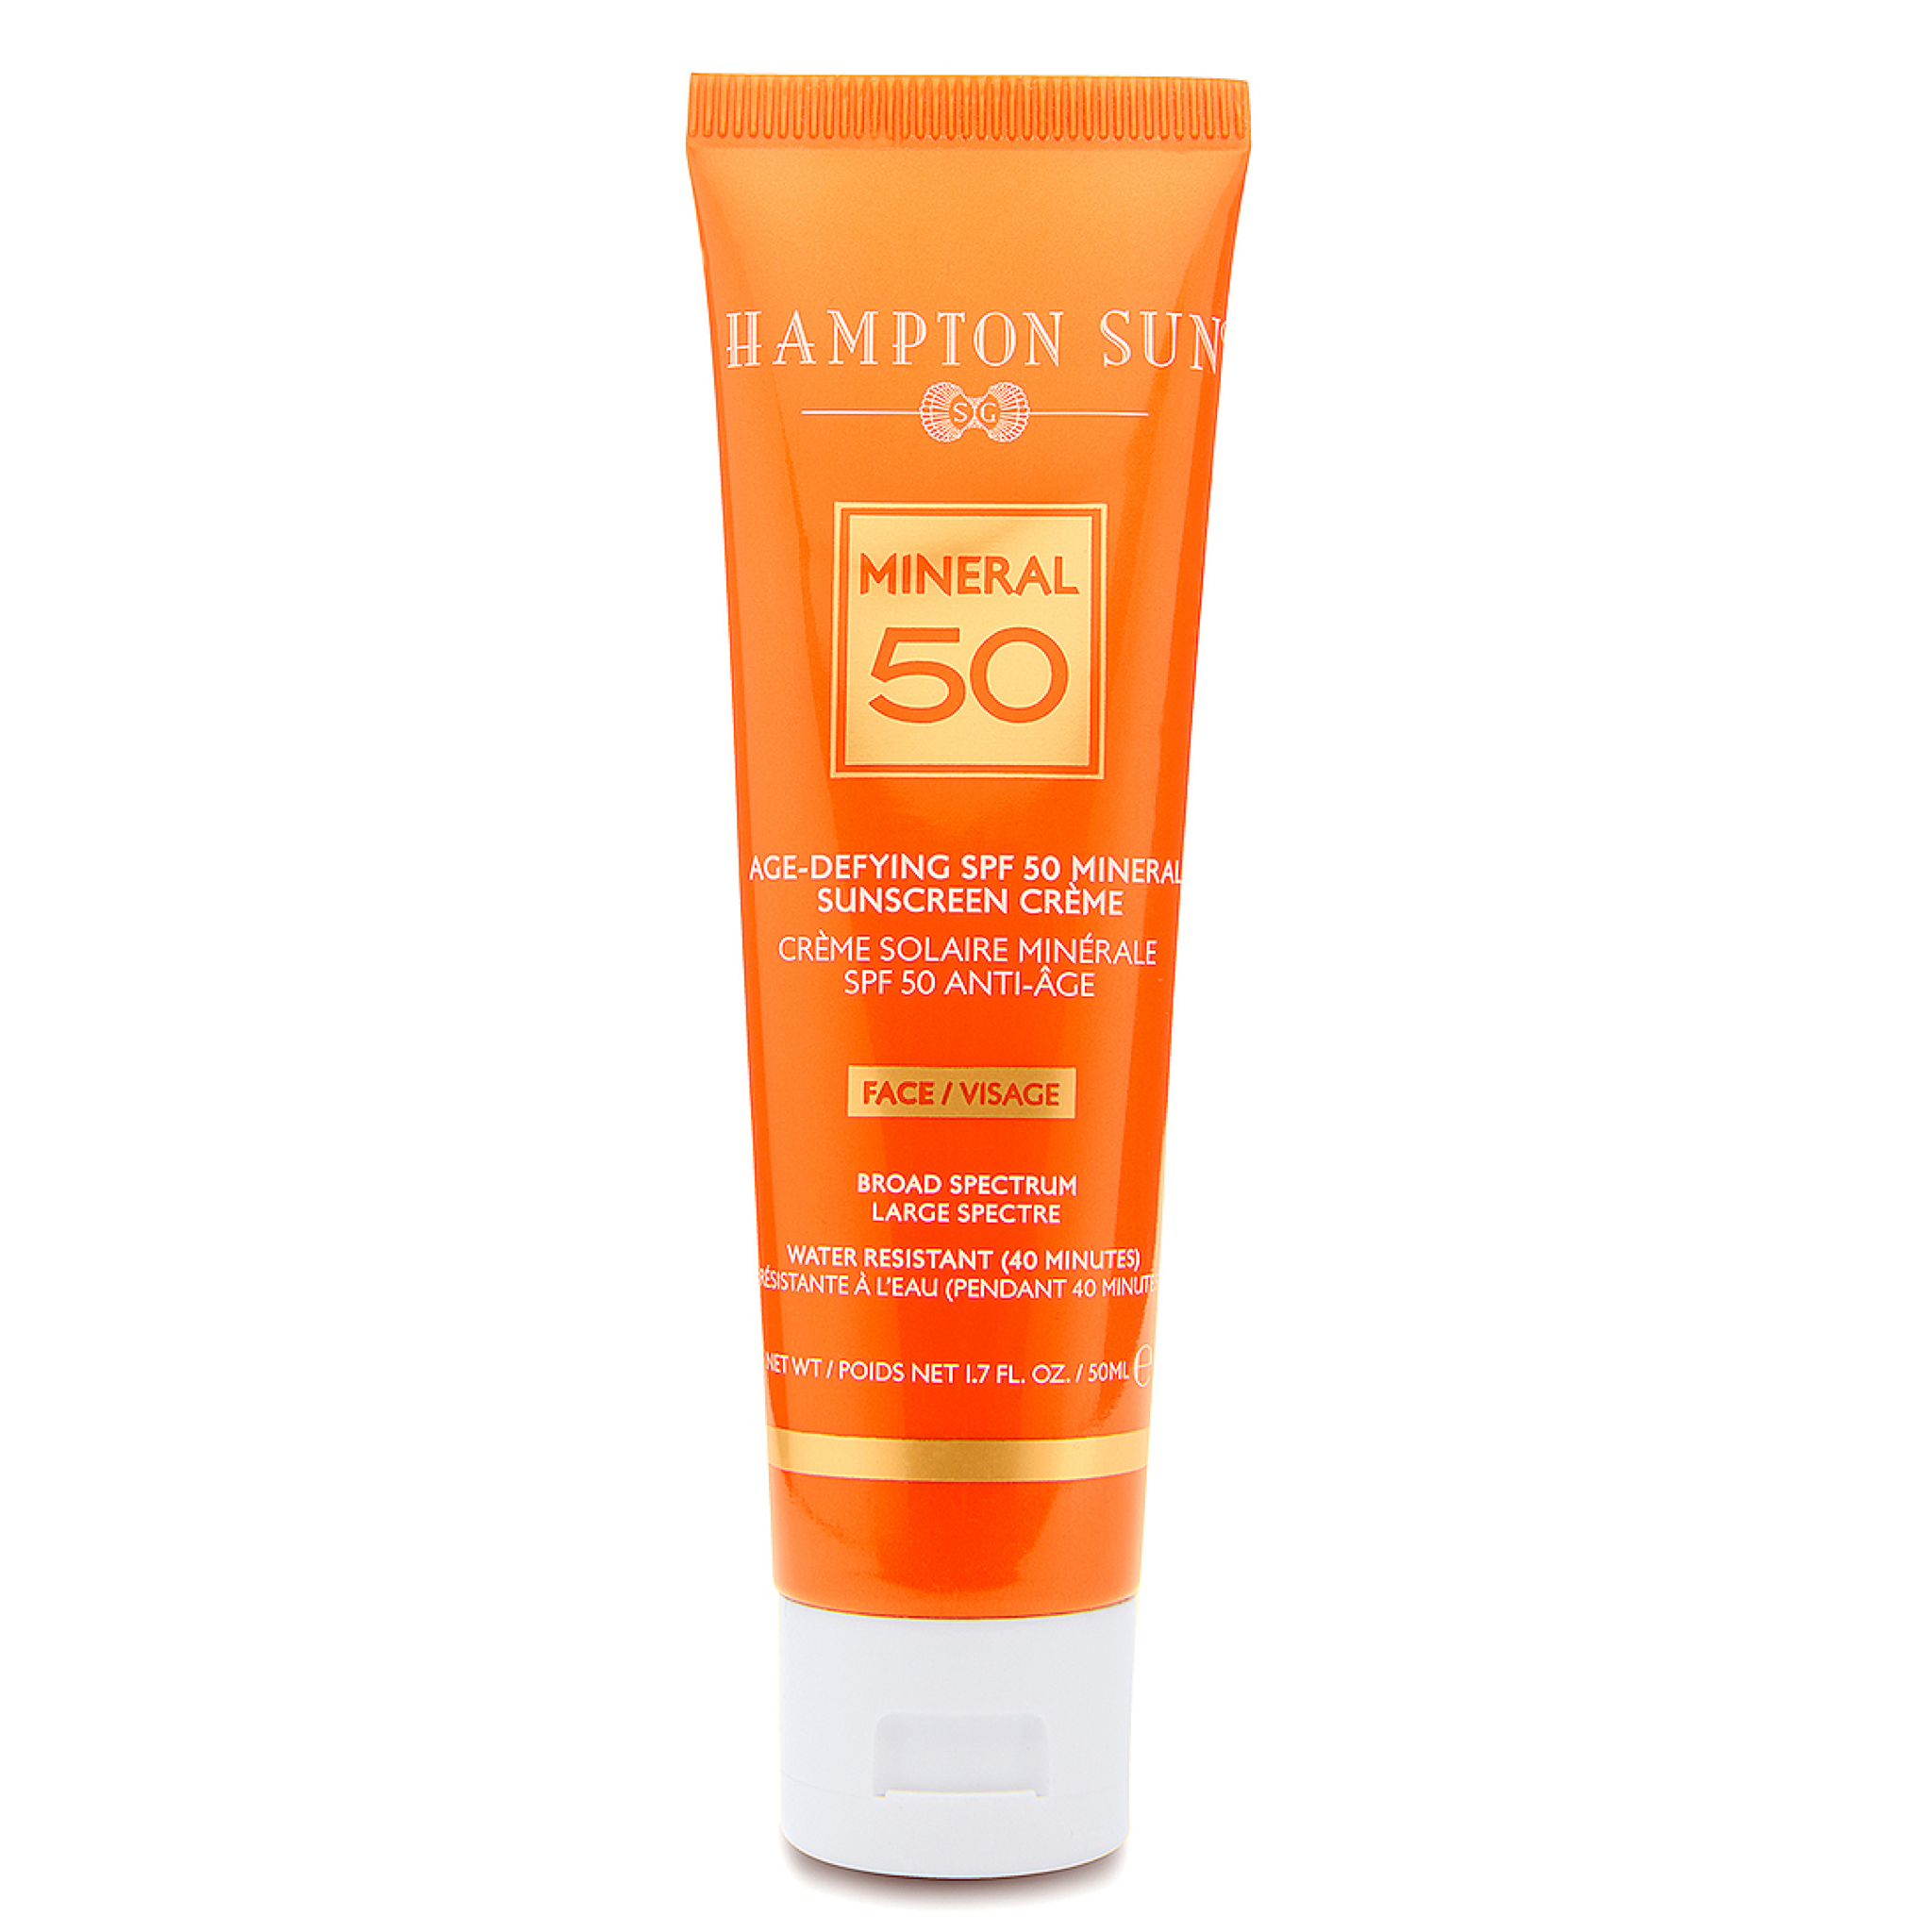 $52 - Age Defying SPF 50 Mineral Creme 